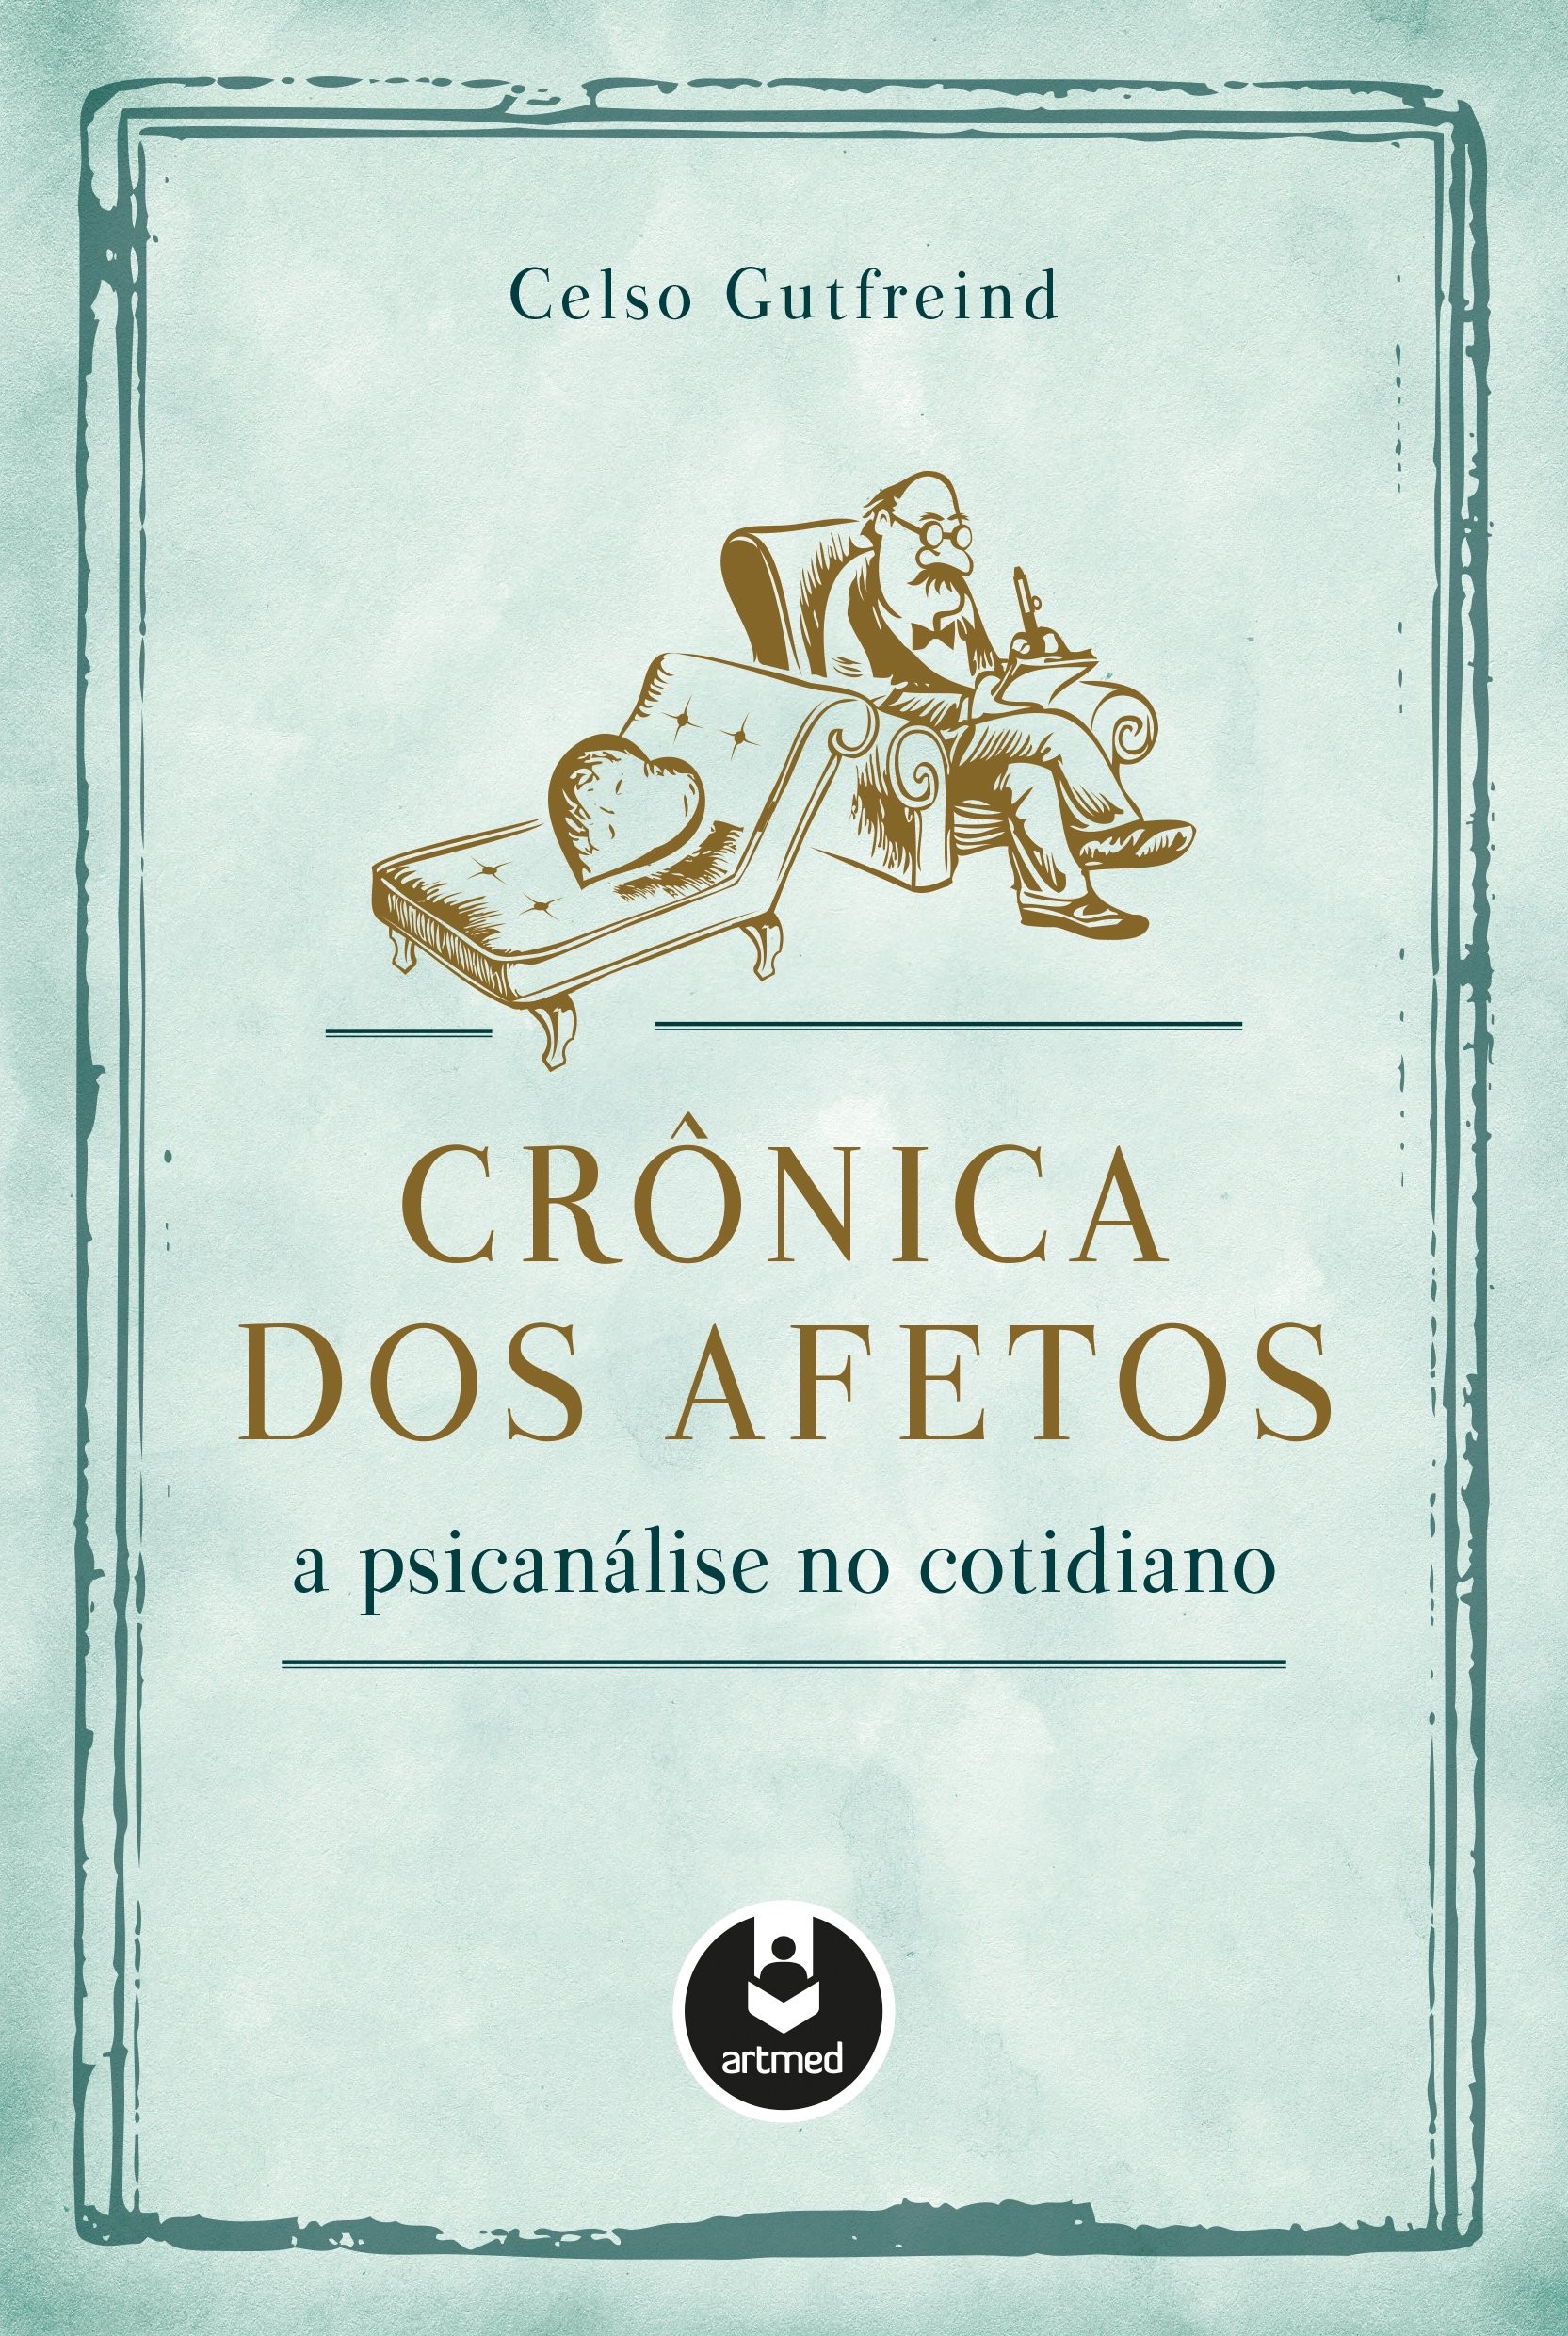 CRONICA DOS AFETOS - A PSICANALISE NO COTIDIANO